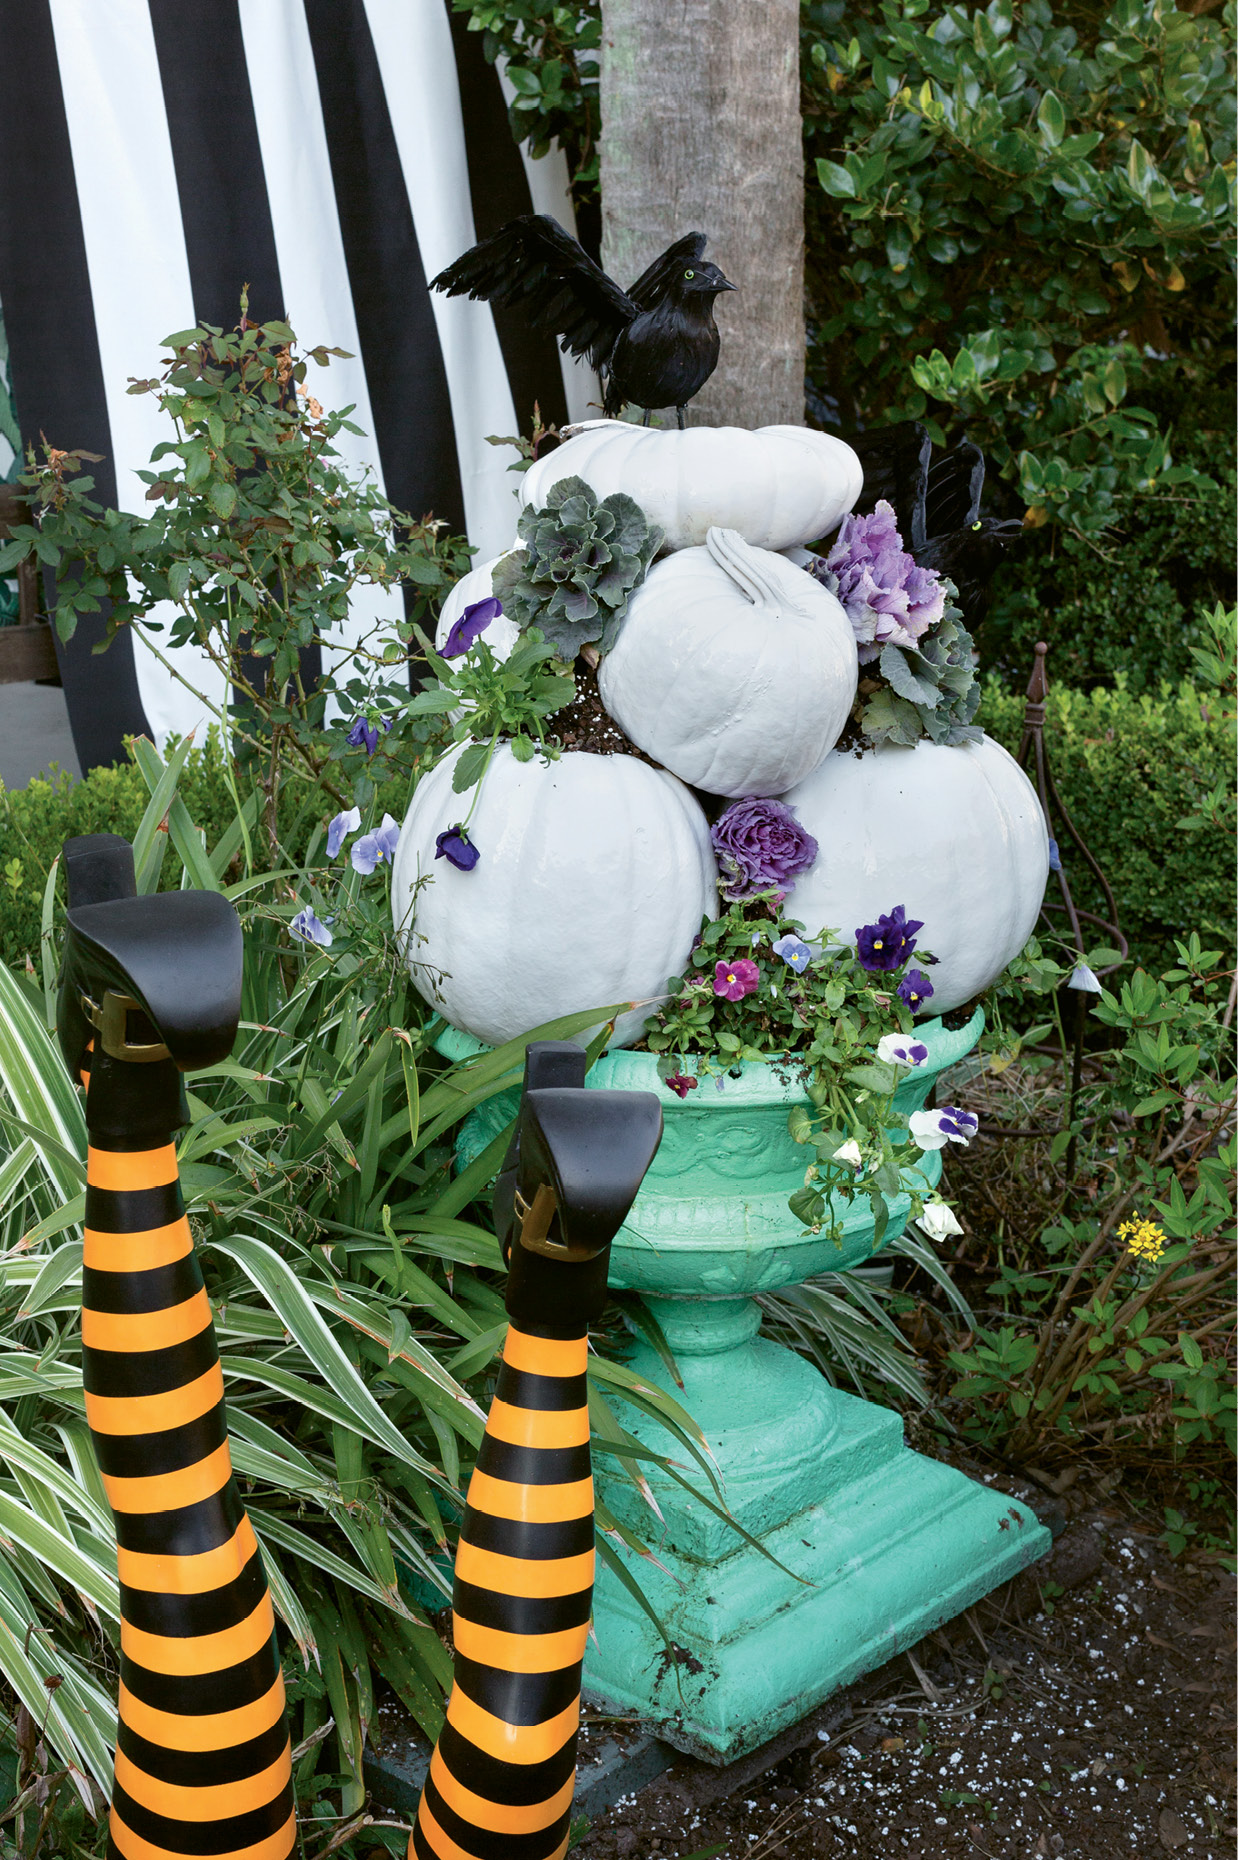 For whimsical garden decorations, fill an urn with potting soil, then balance pumpkins and gourds atop one another, filling the spaces between with more earth.